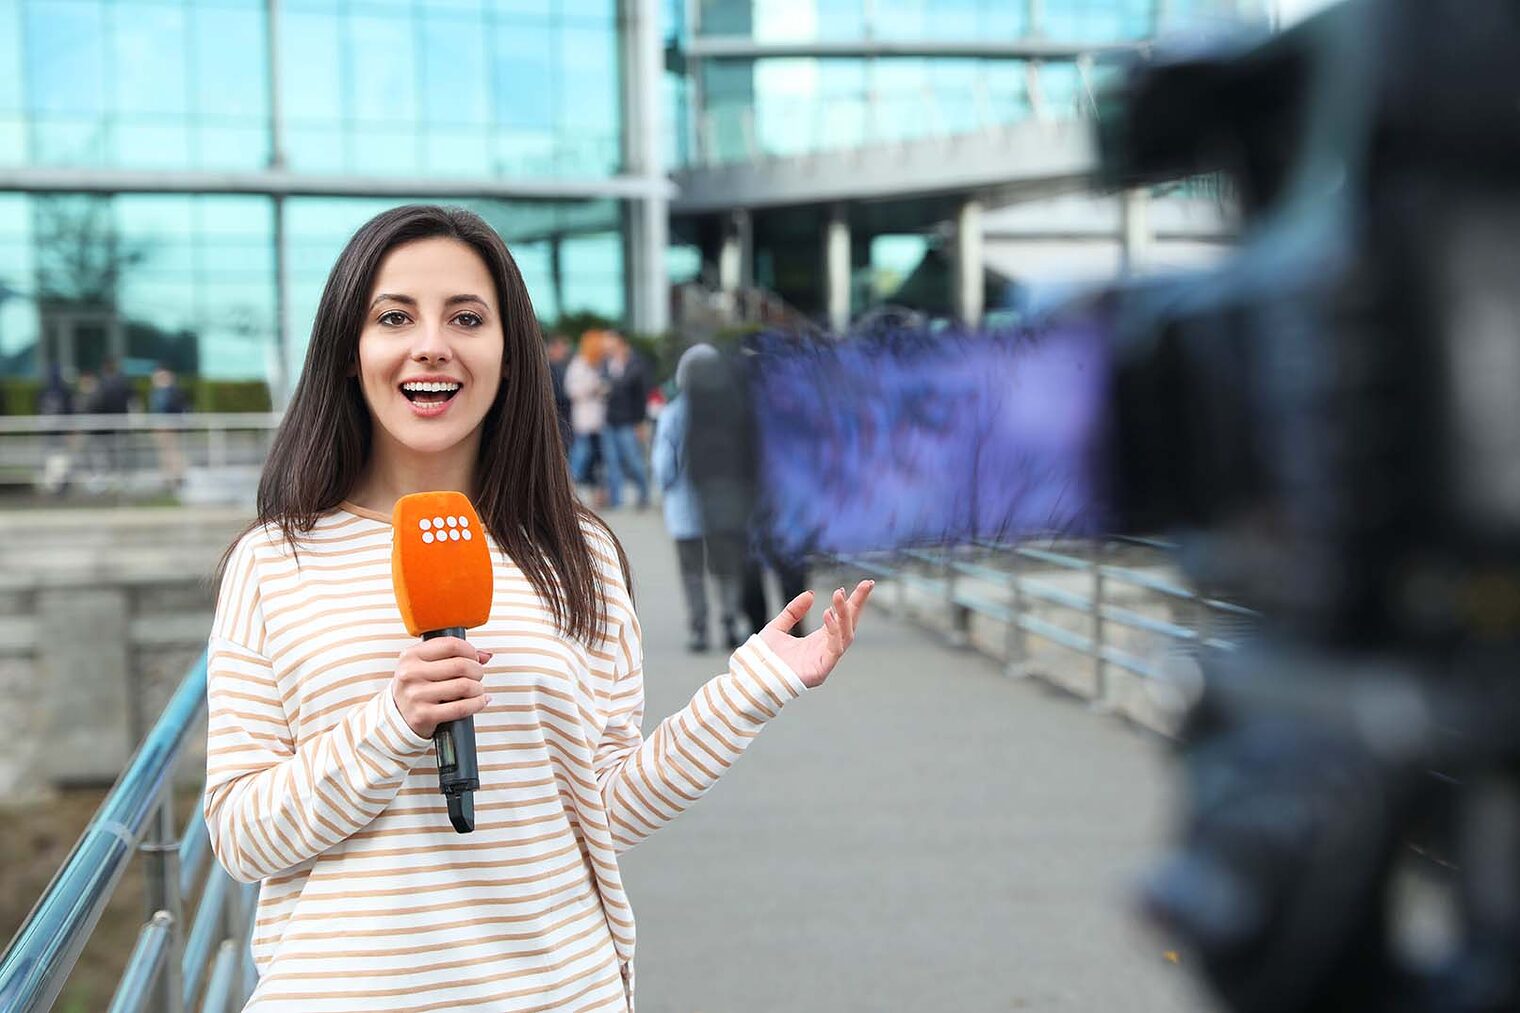 Young female journalist with microphone working on city street Schlagwort(e): equipment, occupation, profession, job, work, anchor, talk, technology, reportage, camera, microphone, street, smiling, happy, person, female, woman, caucasian, adult, speaker, show, report, live, coverage, breaking, announcer, presenter, tv, press, video, journalism, interview, reporting, reporter, newscast, journalist, correspondent, awareness, broadcasting, television, news, media, communication, working, professional, city, young, outdoors, day, equipment, occupation, profession, job, work, anchor, talk, technology, reportage, camera, microphone, street, smiling, happy, person, female, woman, caucasian, adult, speaker, show, report, live, coverage, breaking, announcer, presenter, tv, press, video, journalism, interview, reporting, reporter, newscast, journalist, correspondent, awareness, broadcasting, television, news, media, communication, working, professional, city, young, outdoors, day